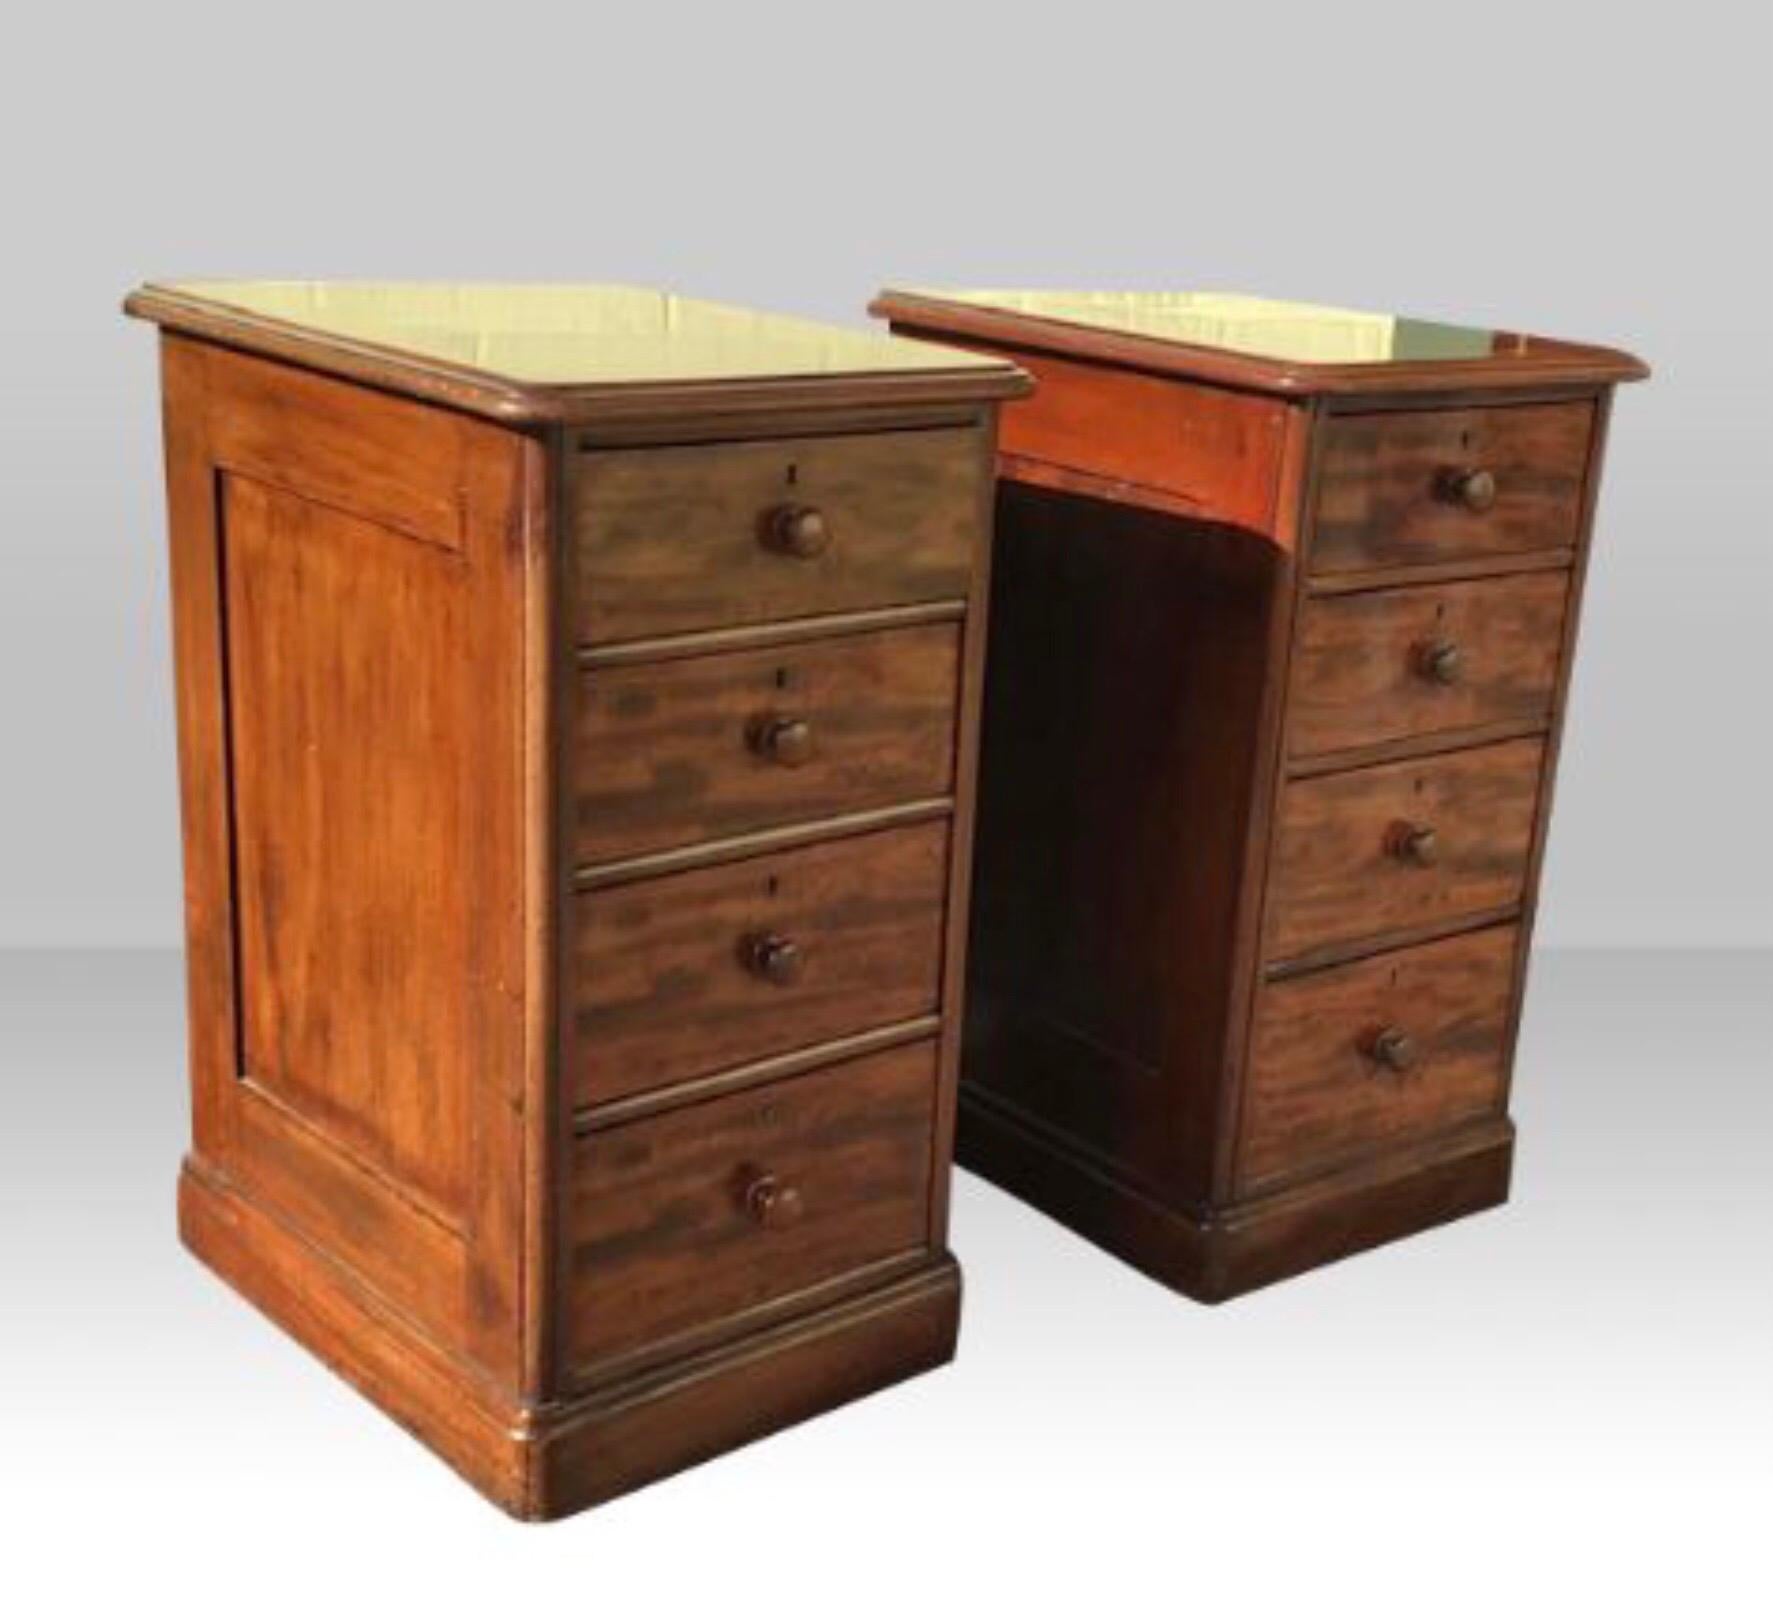 Pair of large antique mahogany bedside chests cabinets.
Circa 1880.
Measures: height 32 ins
width 18 ins
depth 22 ins
£1750.